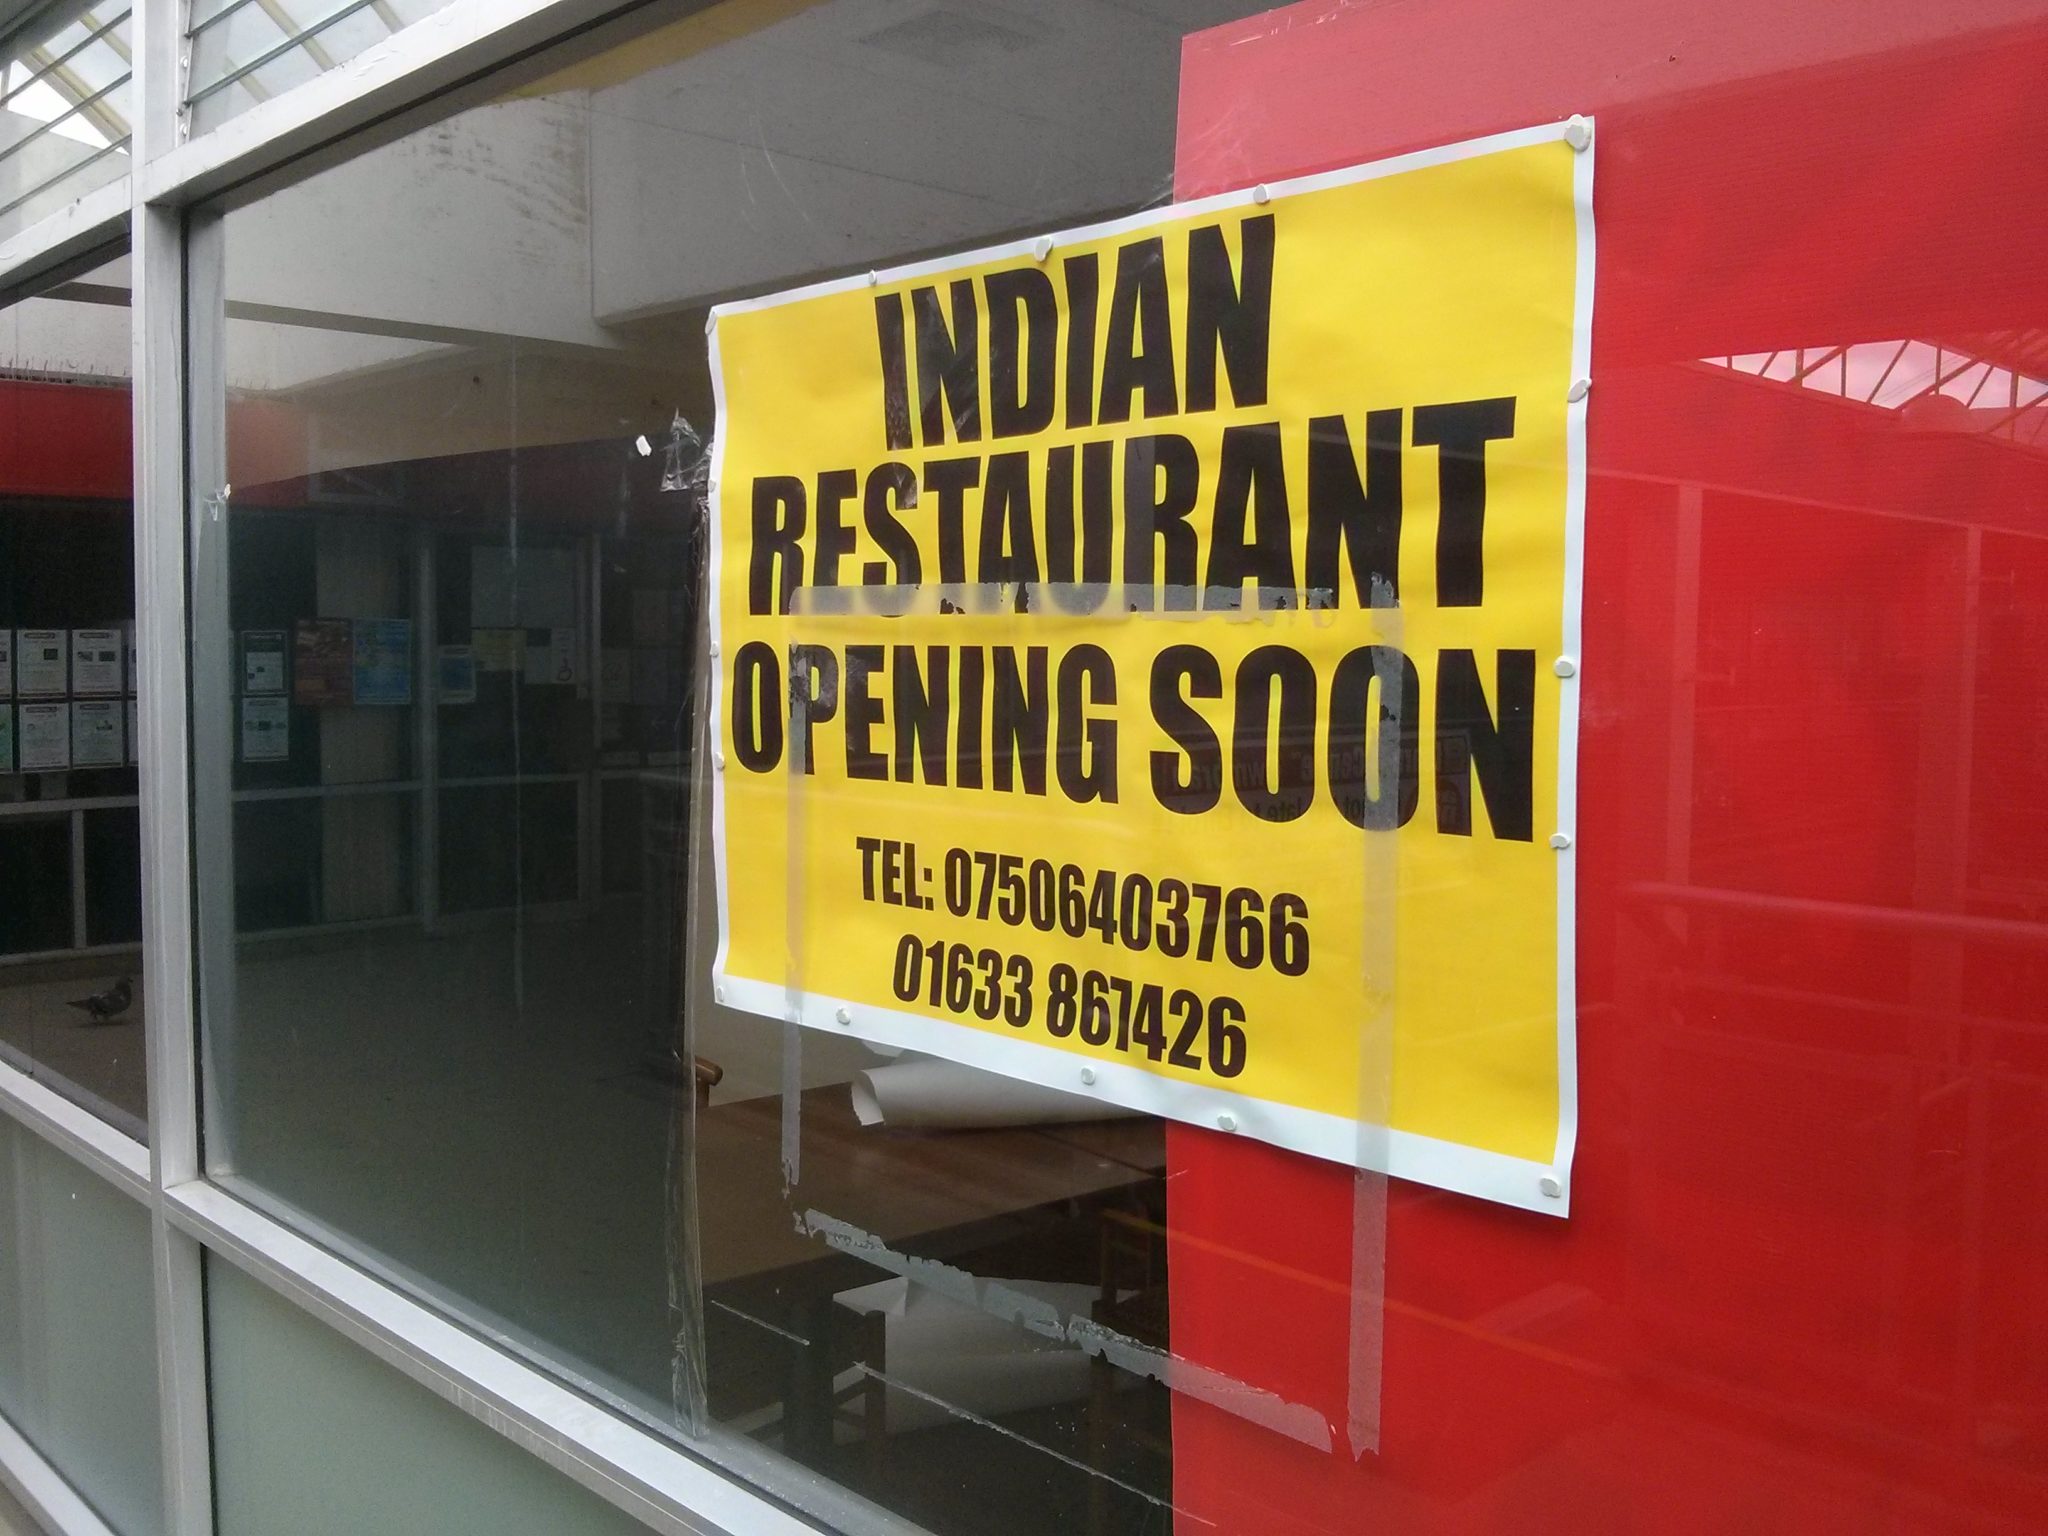 The sign on former Chinese restaurant in Cwmbran